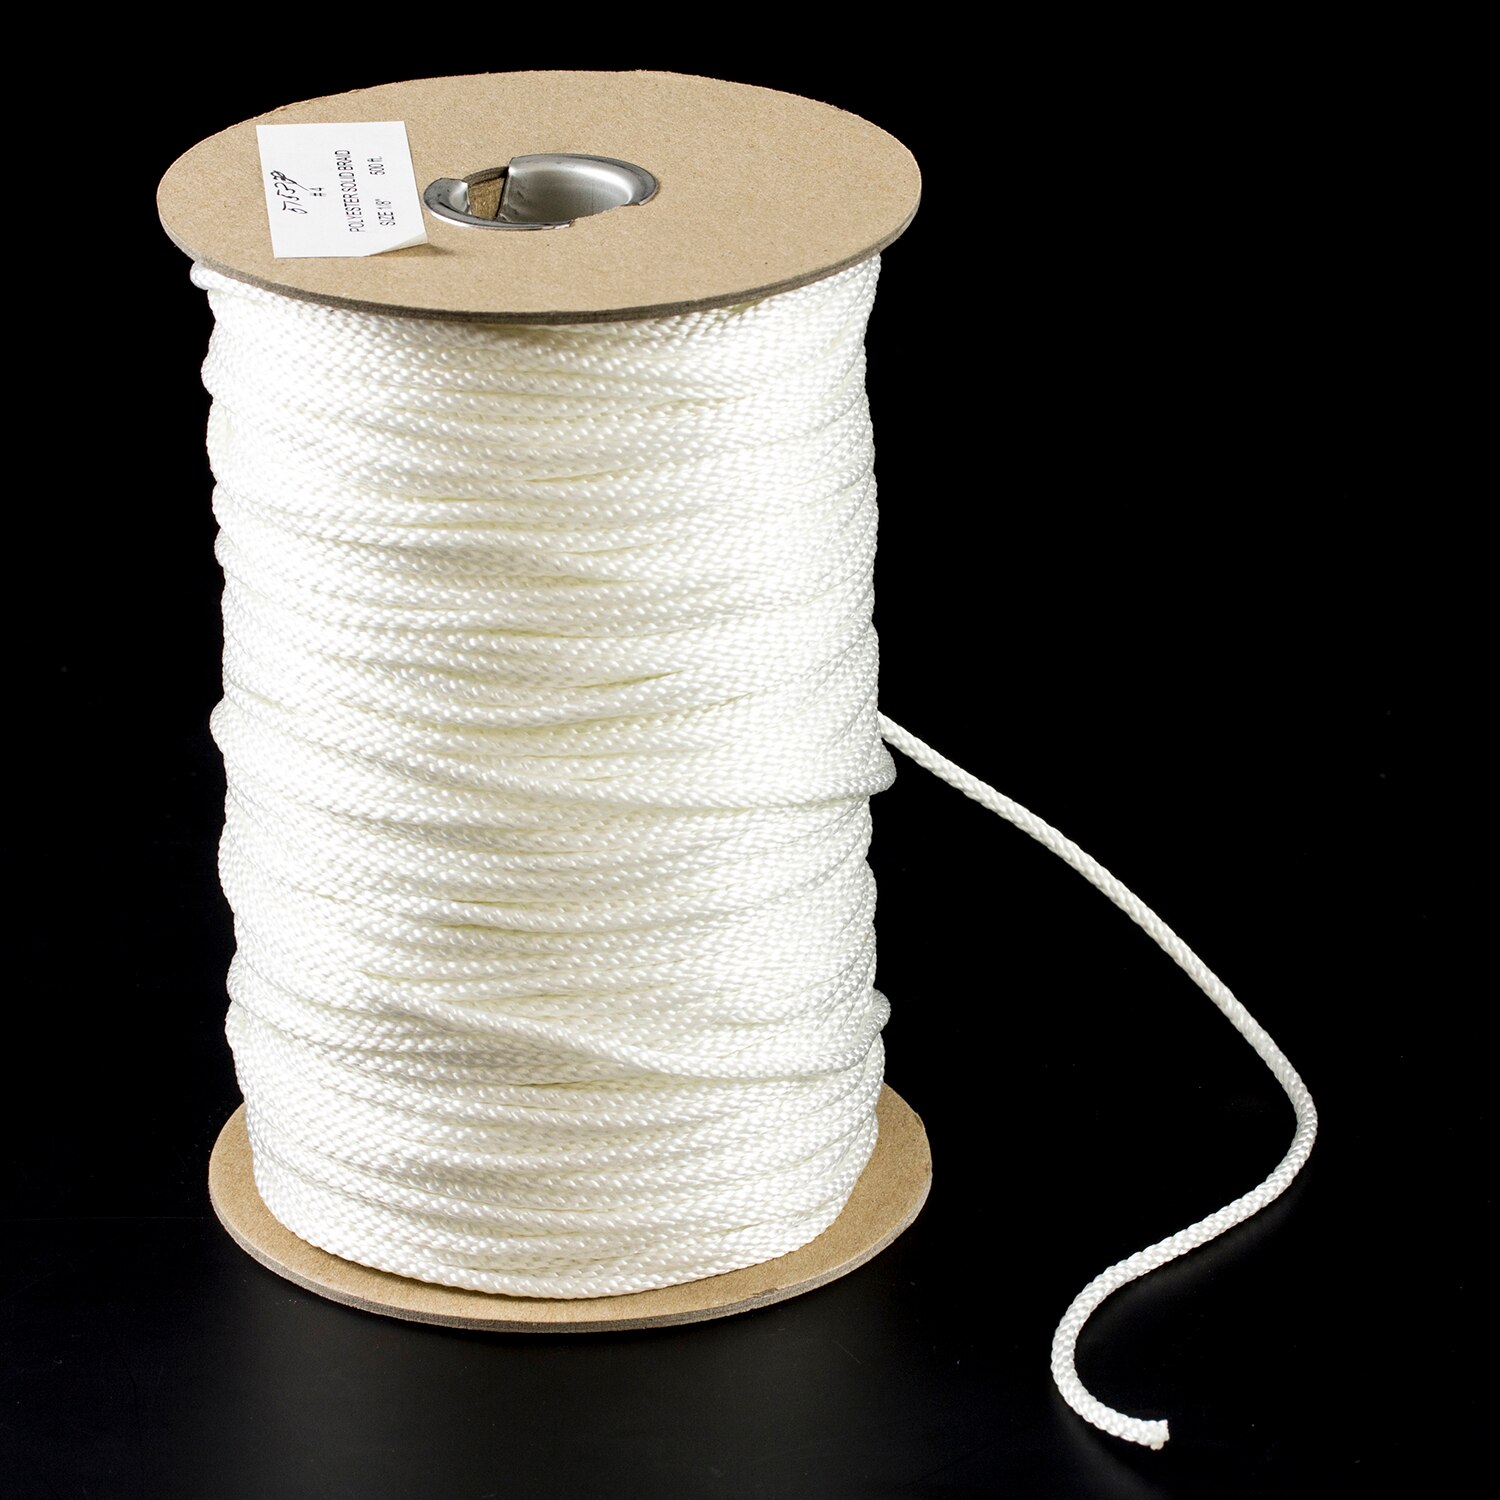 Solid Braided Polyester Cord #4 1/8 x 500' White